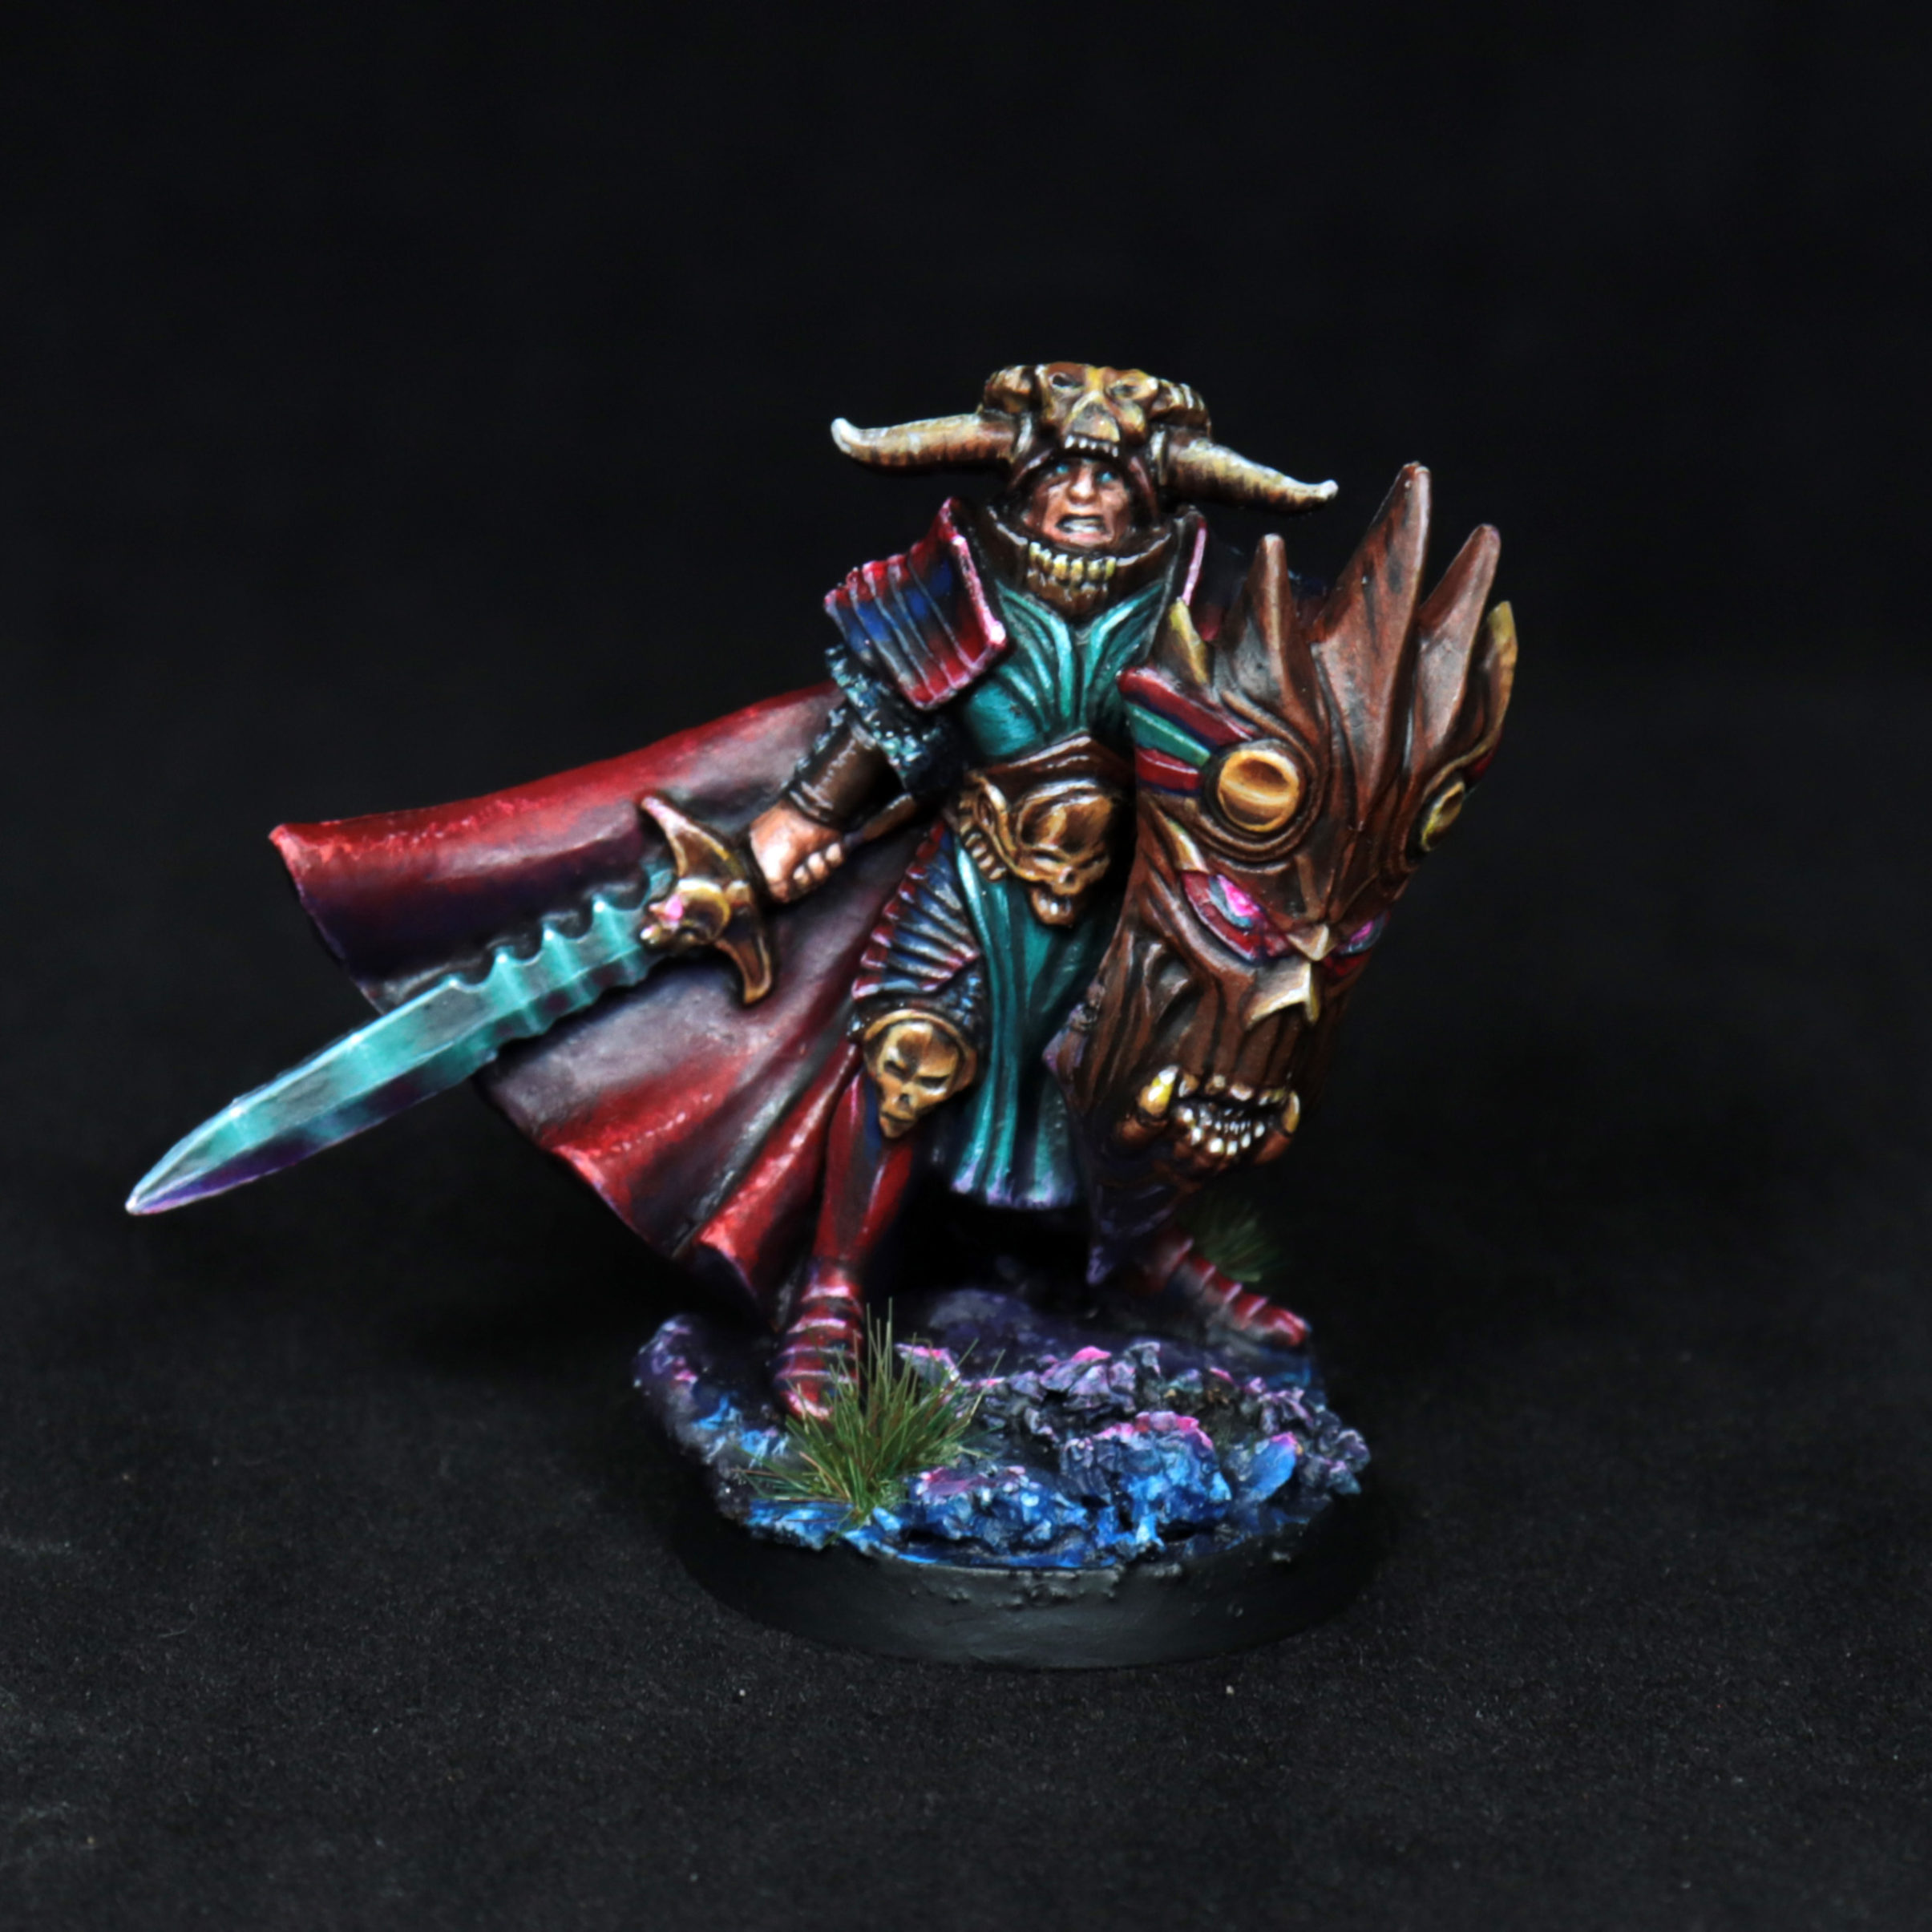 Painted Dnd Reaper Miniature Anti Paladin Barbarian Warrior for sale -  Frozen Fire Arts